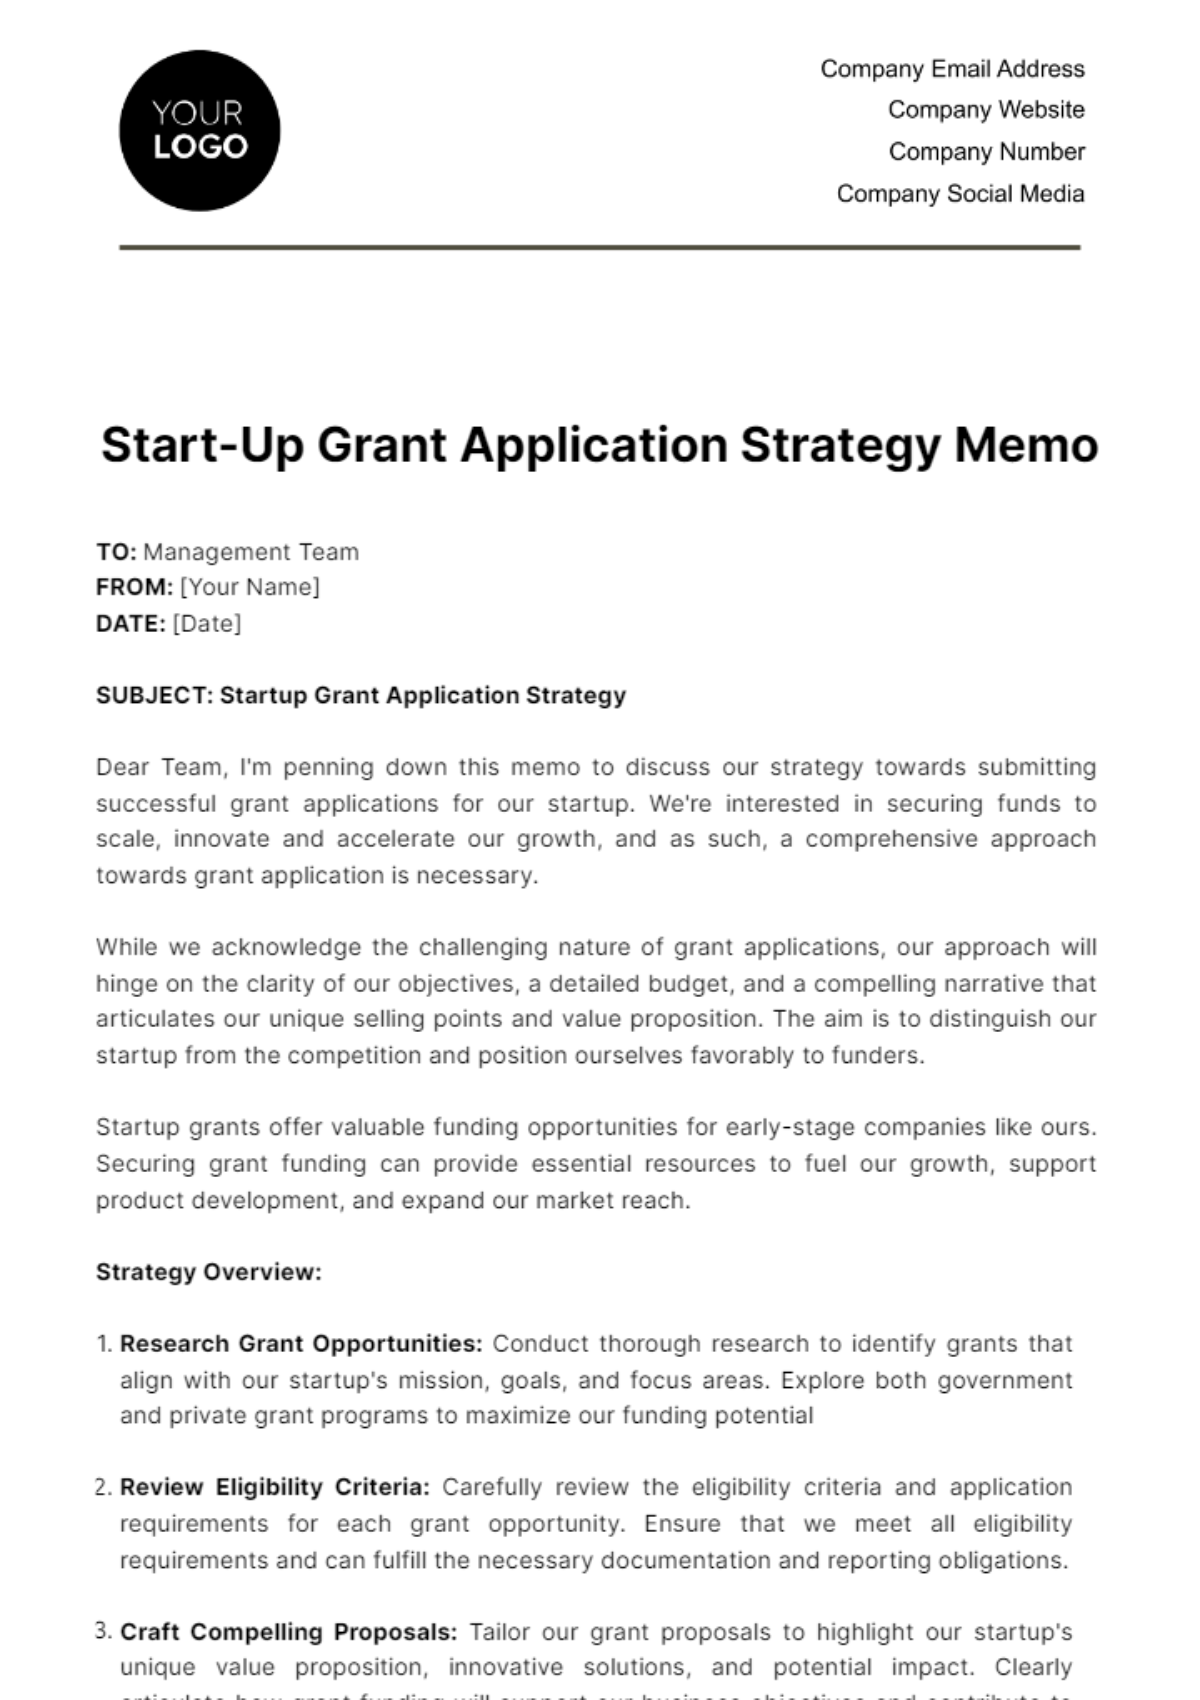 Startup Grant Application Strategy Memo Template